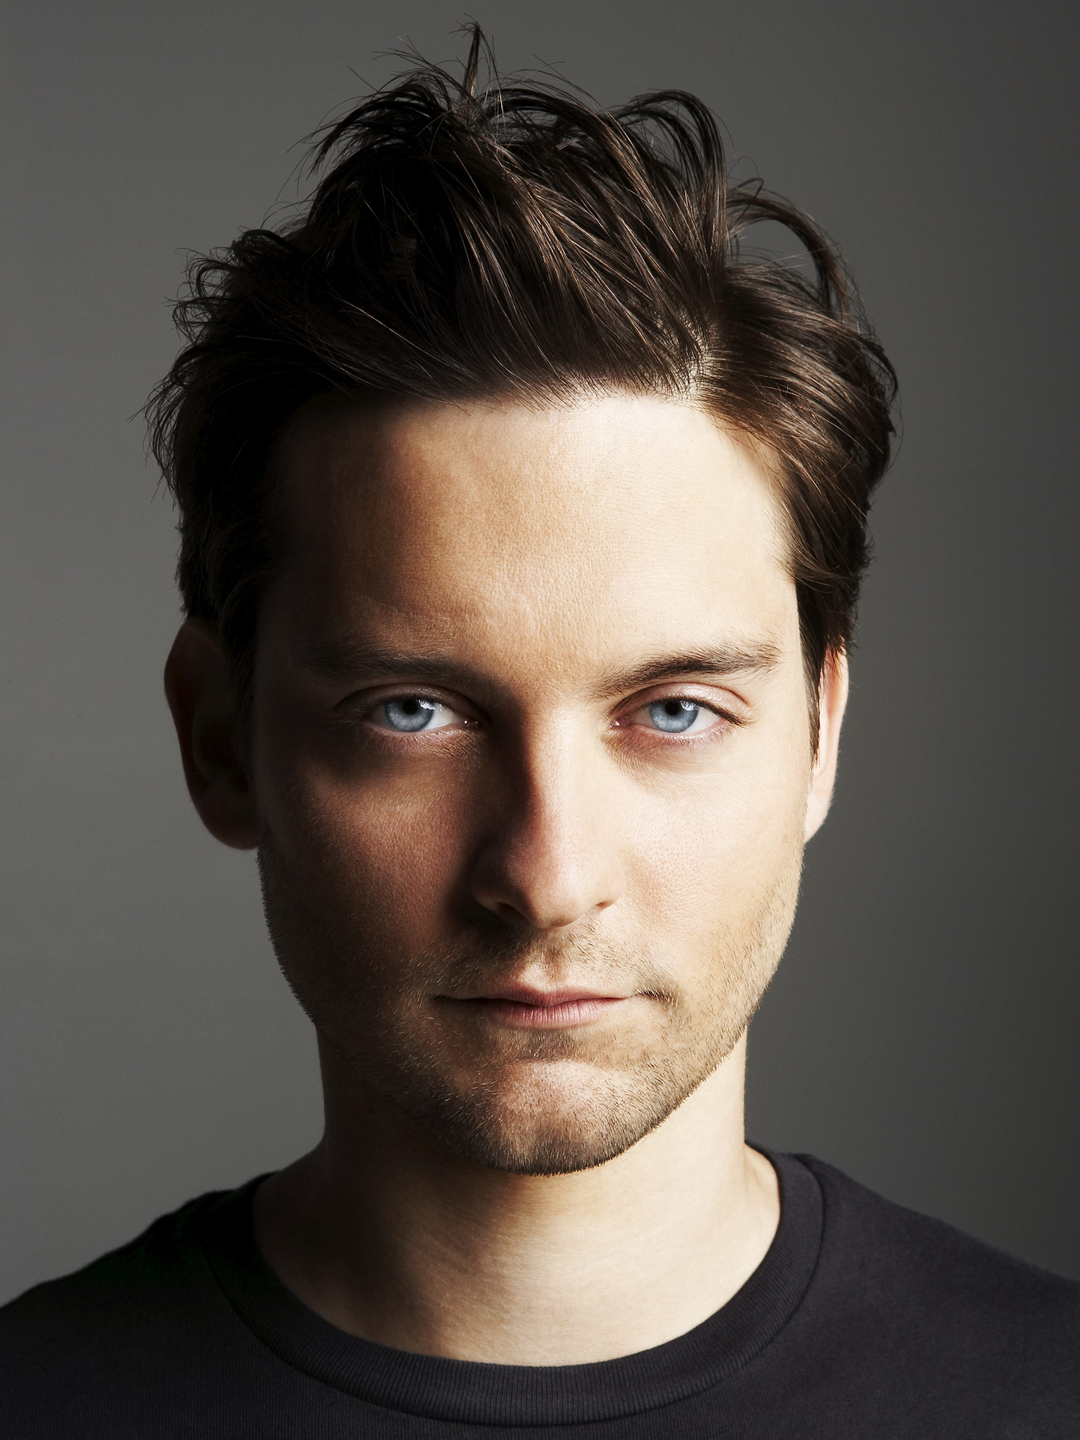 Tobey Maguire early career